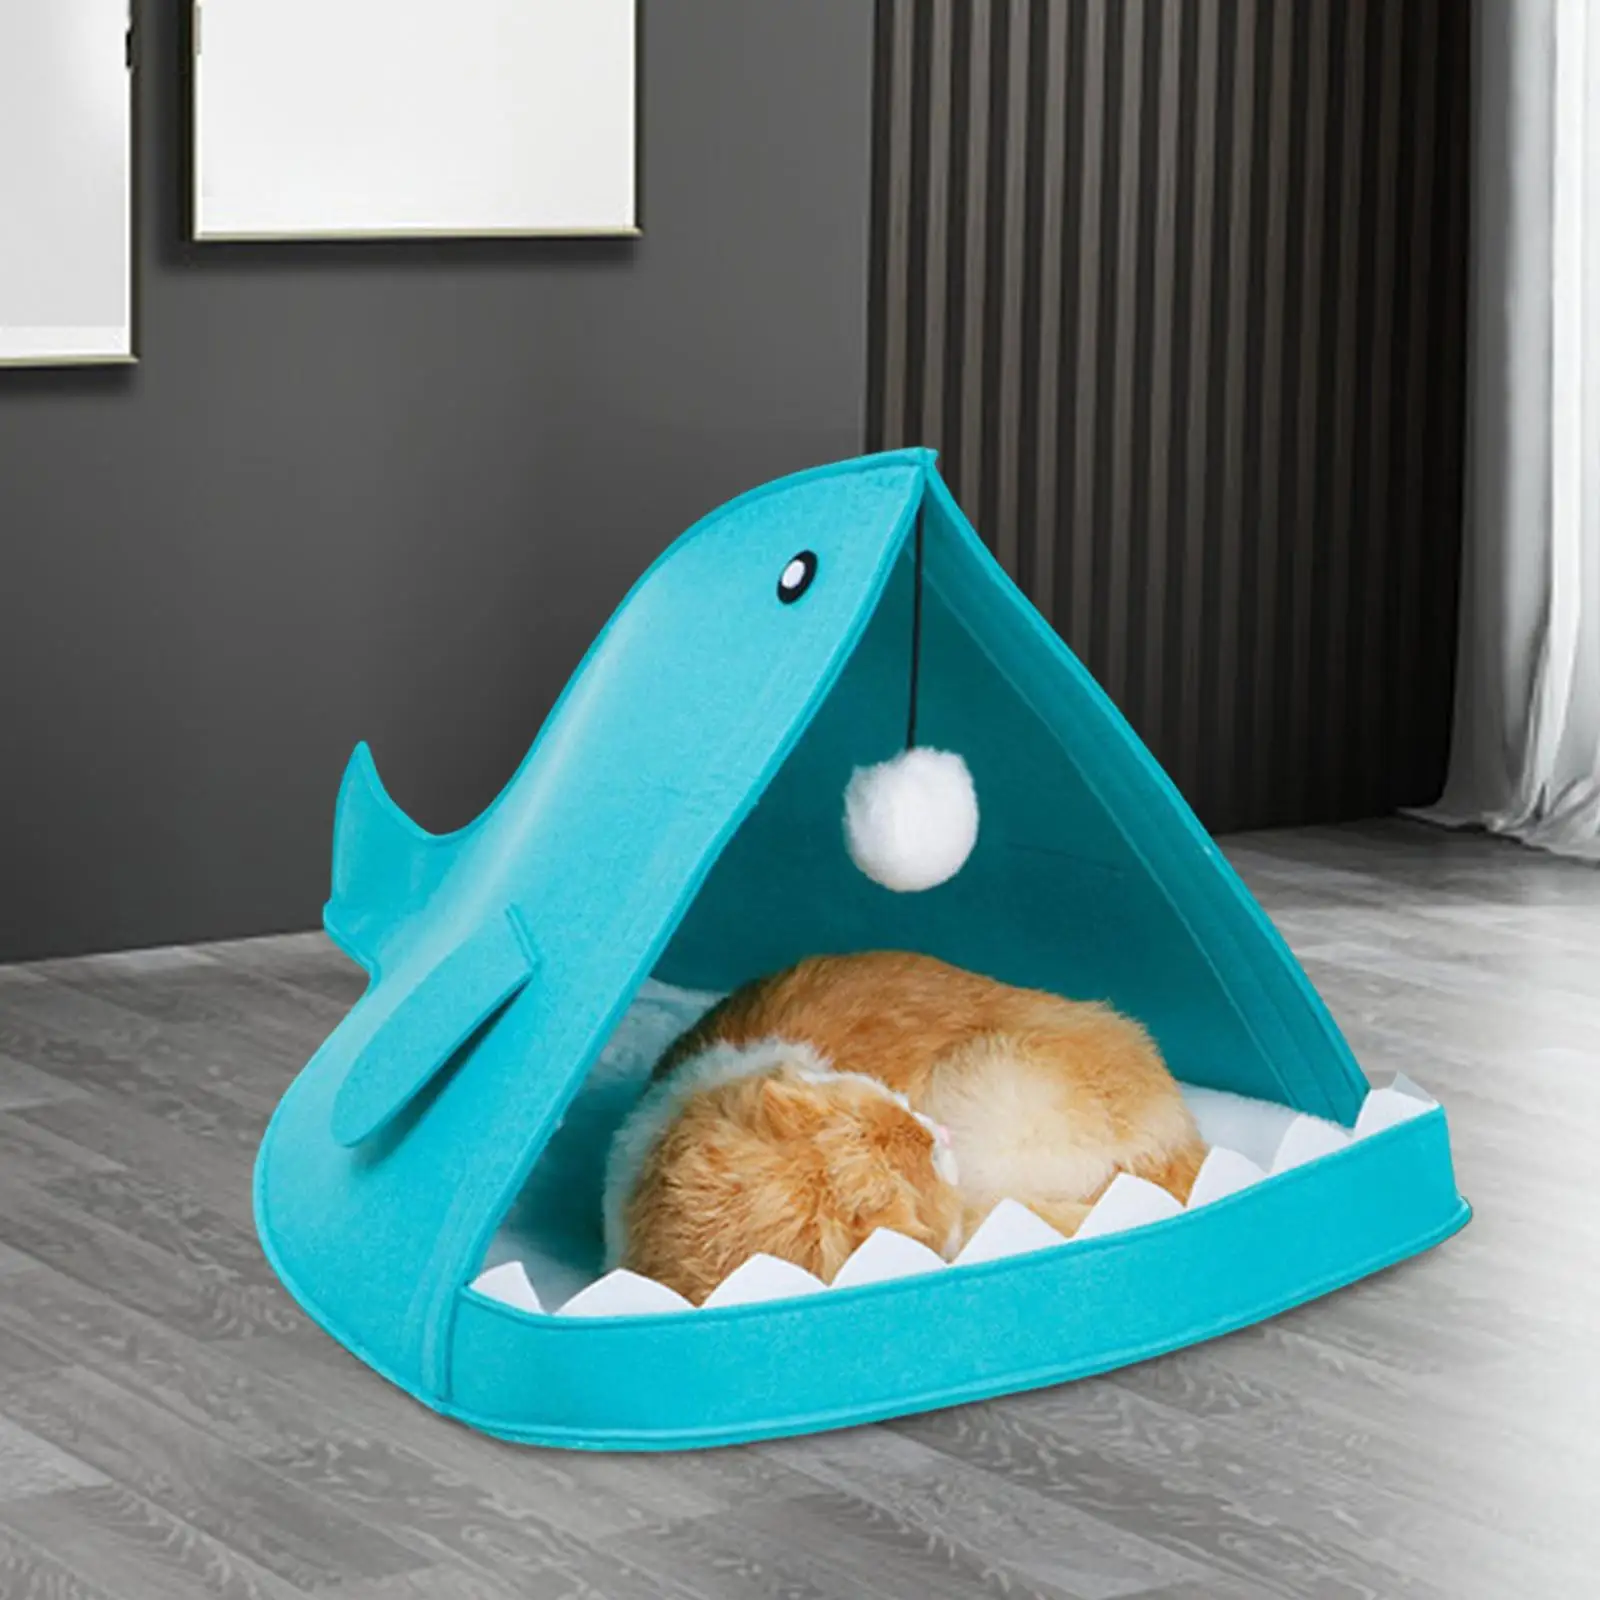 Felt Cat Beds for Indoor Cats Soft Pet Bed Small Kitten Bed Shark Shaped for Small Animal